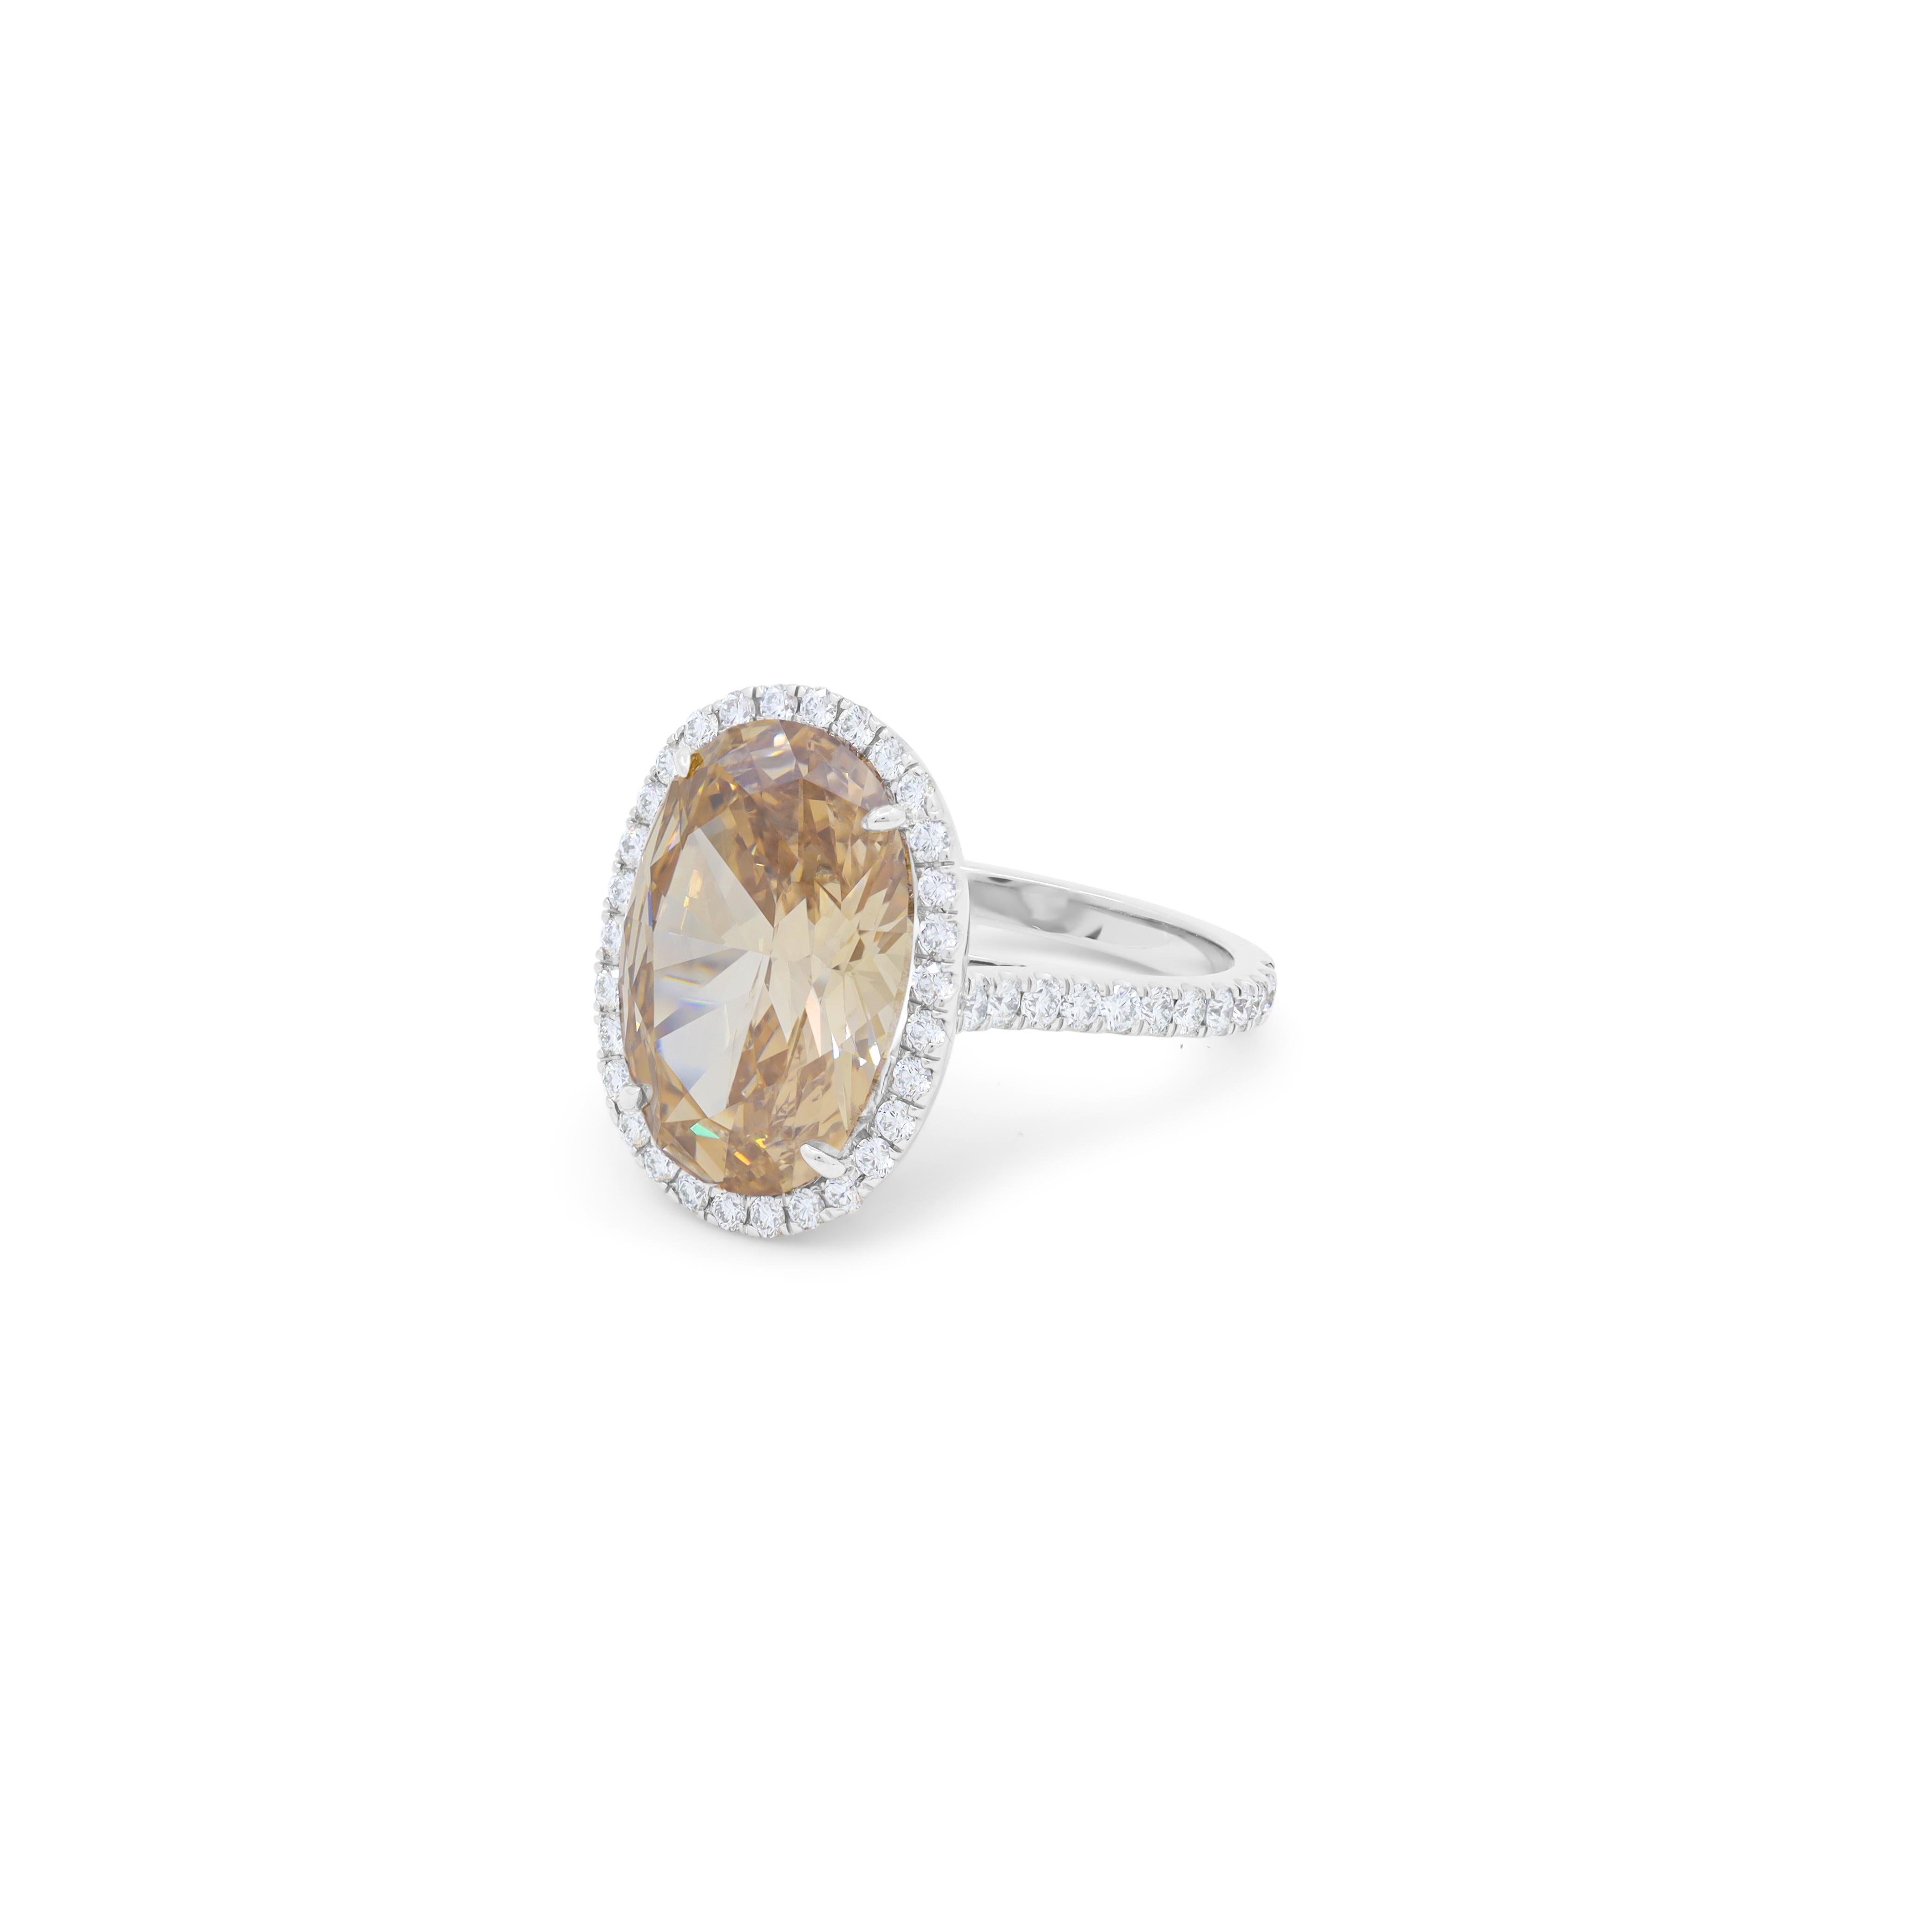 Diana M. Platinum Ring Featuring a center 7.91ct GIA certified Fancy Conac Brown For Sale 1